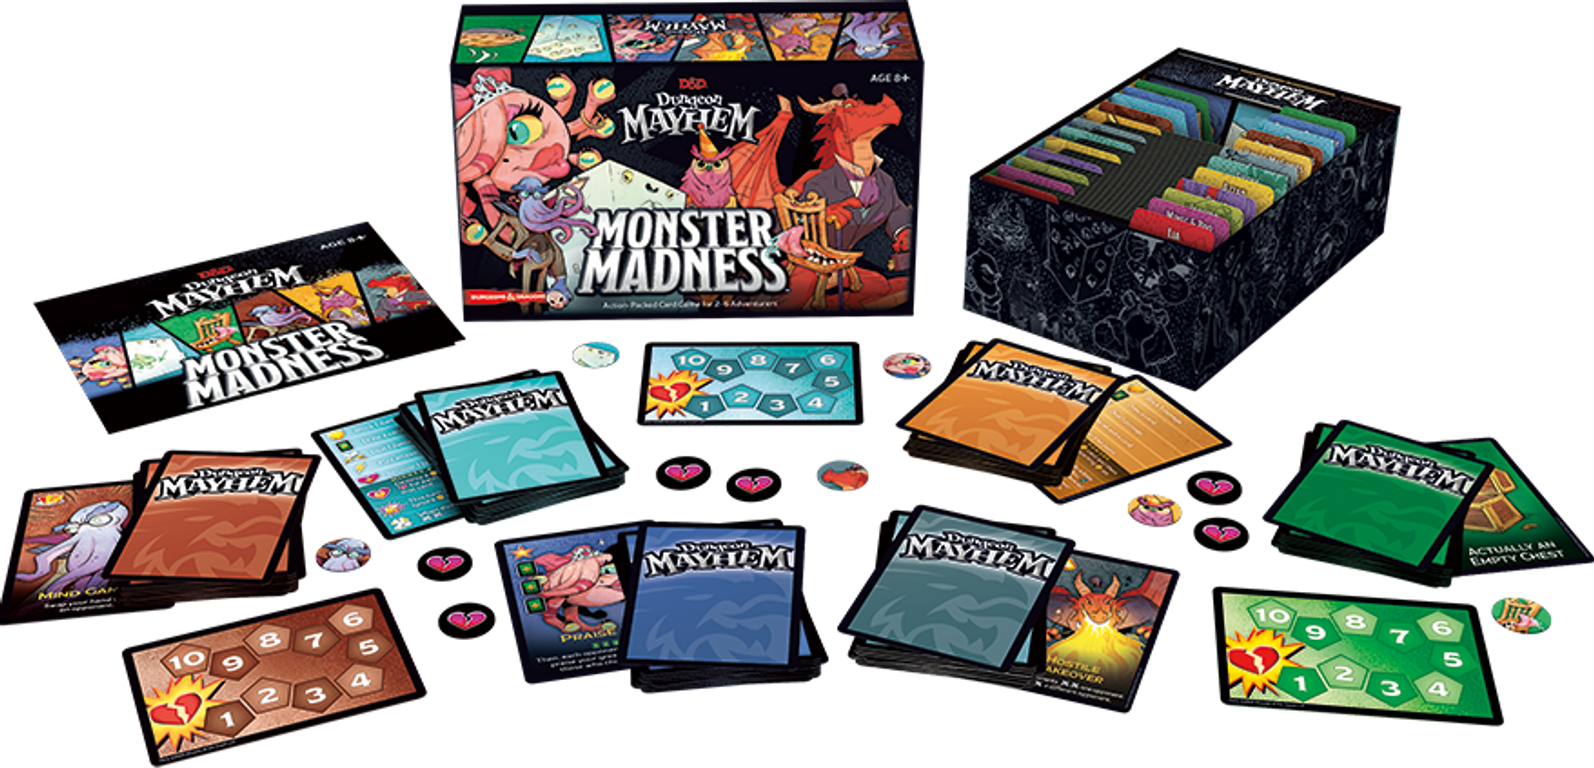 Dungeon Mayhem: Monster Madness components